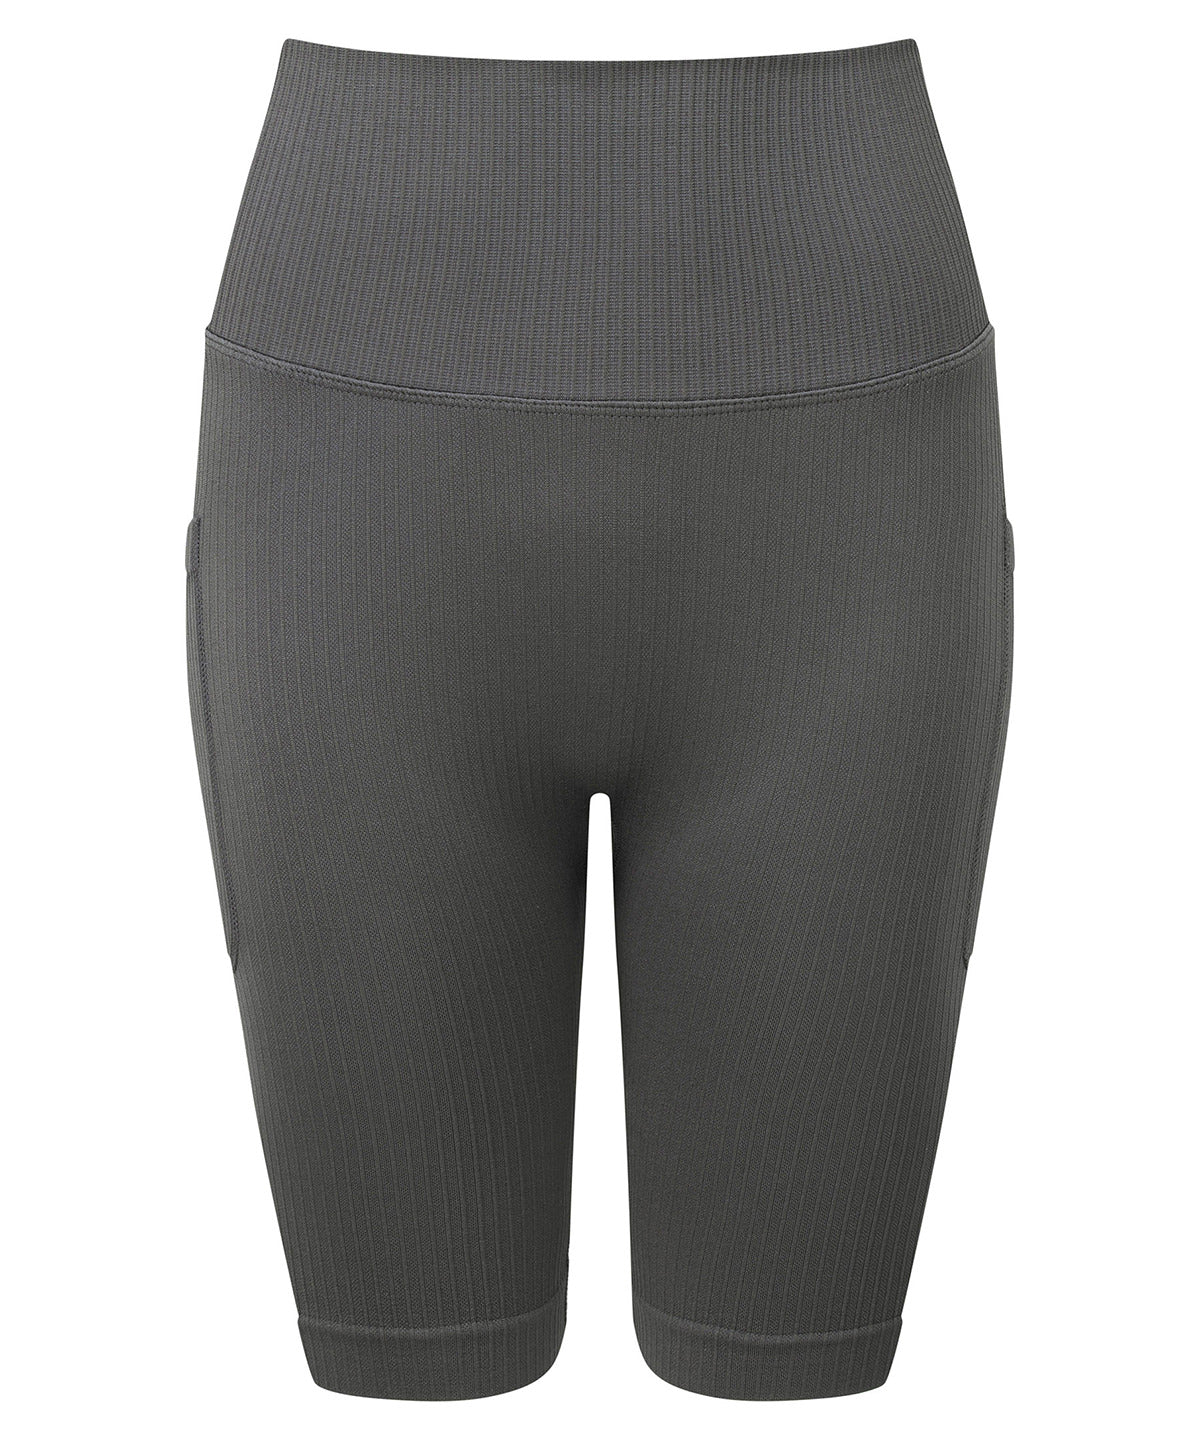 Women’s ribbed seamless '3D Fit' cycle shorts